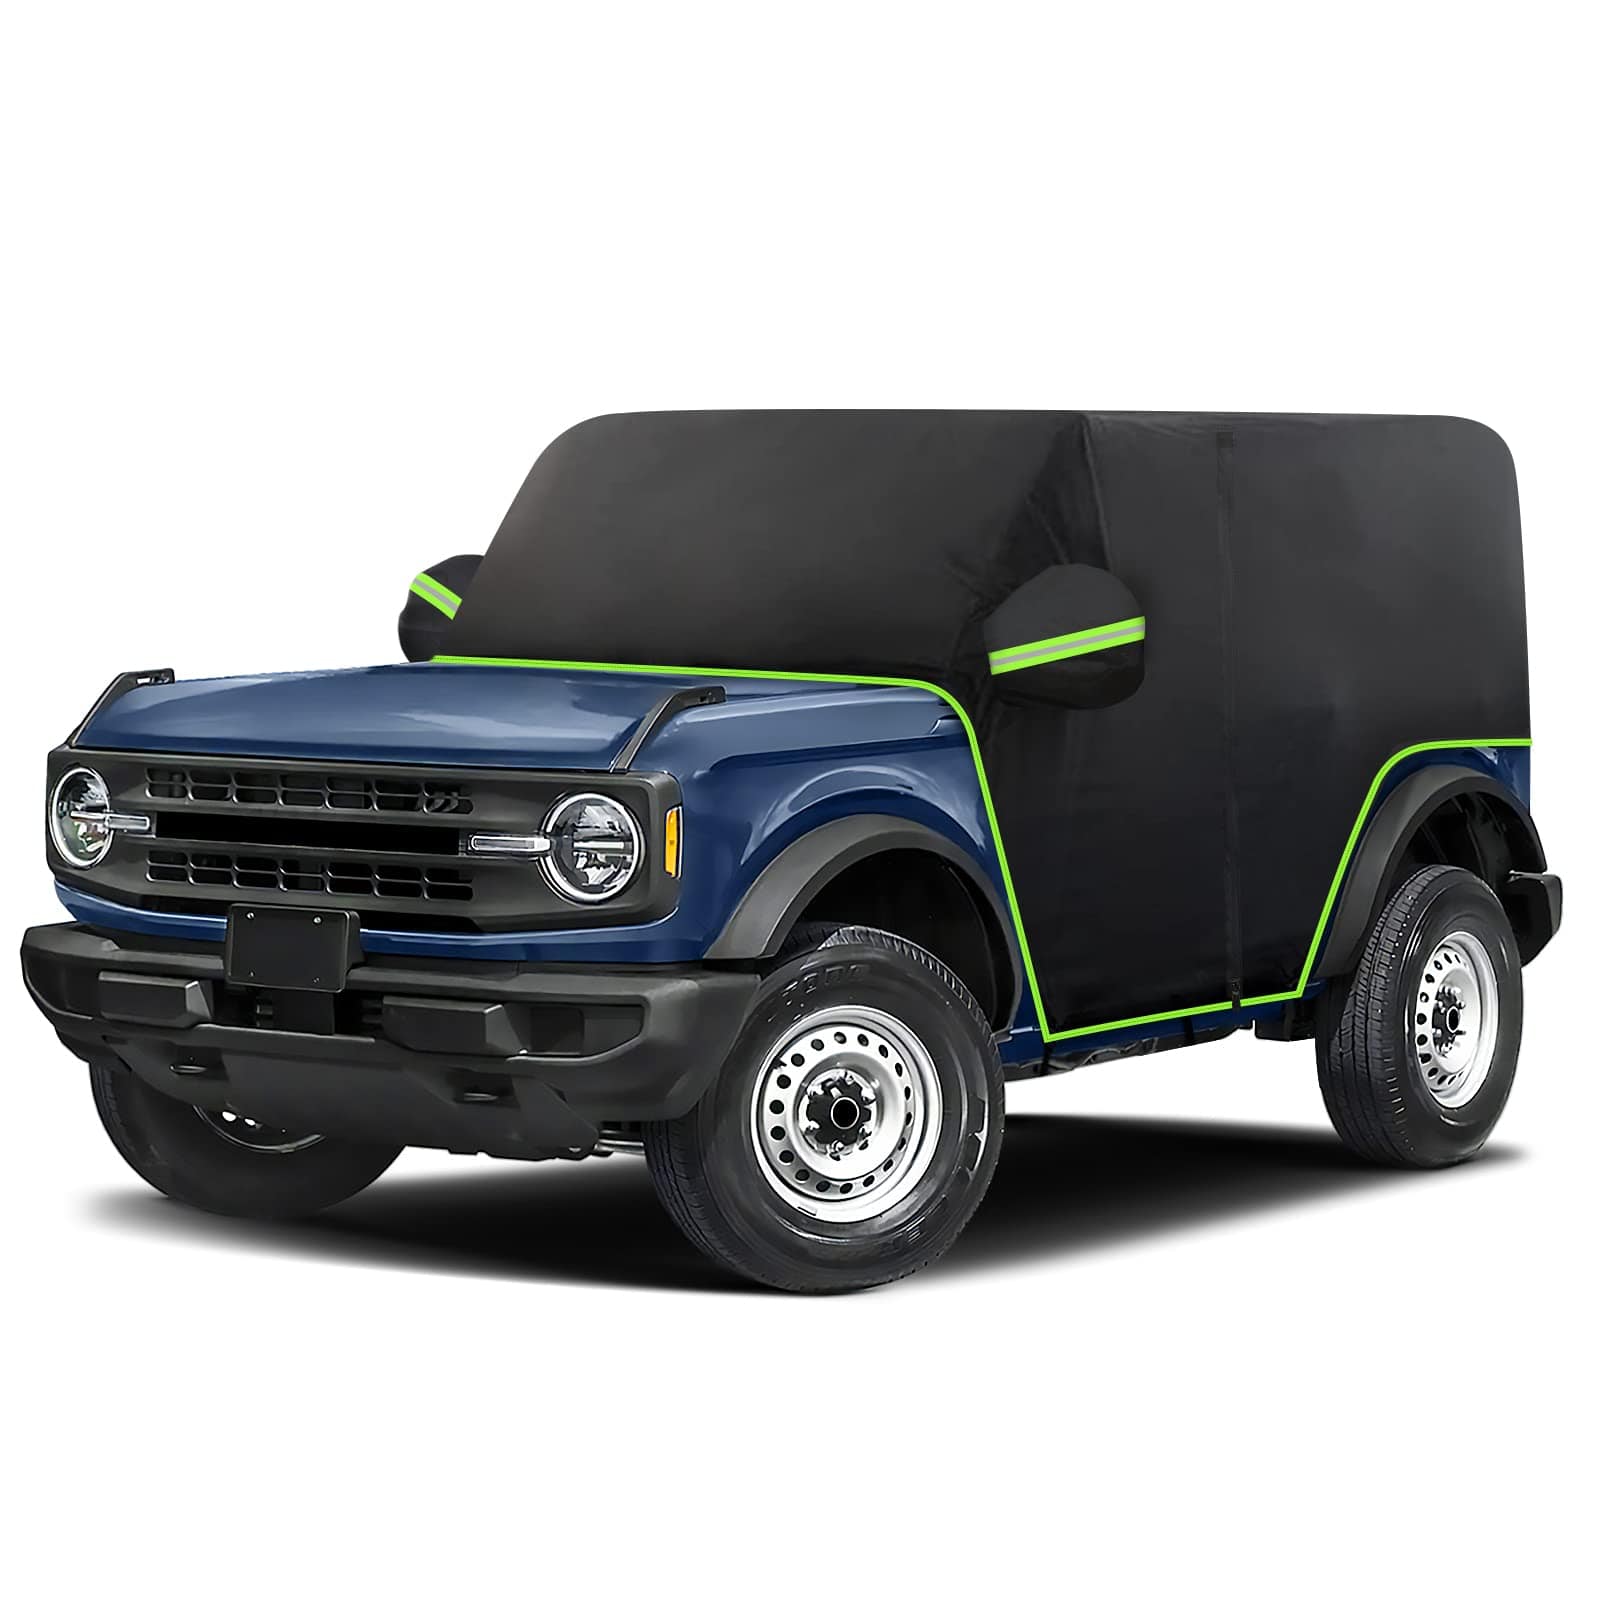 SUPAREE Ford 4 Door Ford Bronco 2/4 Door weatherproof Cab Car Covers for 2021 2022 Product description